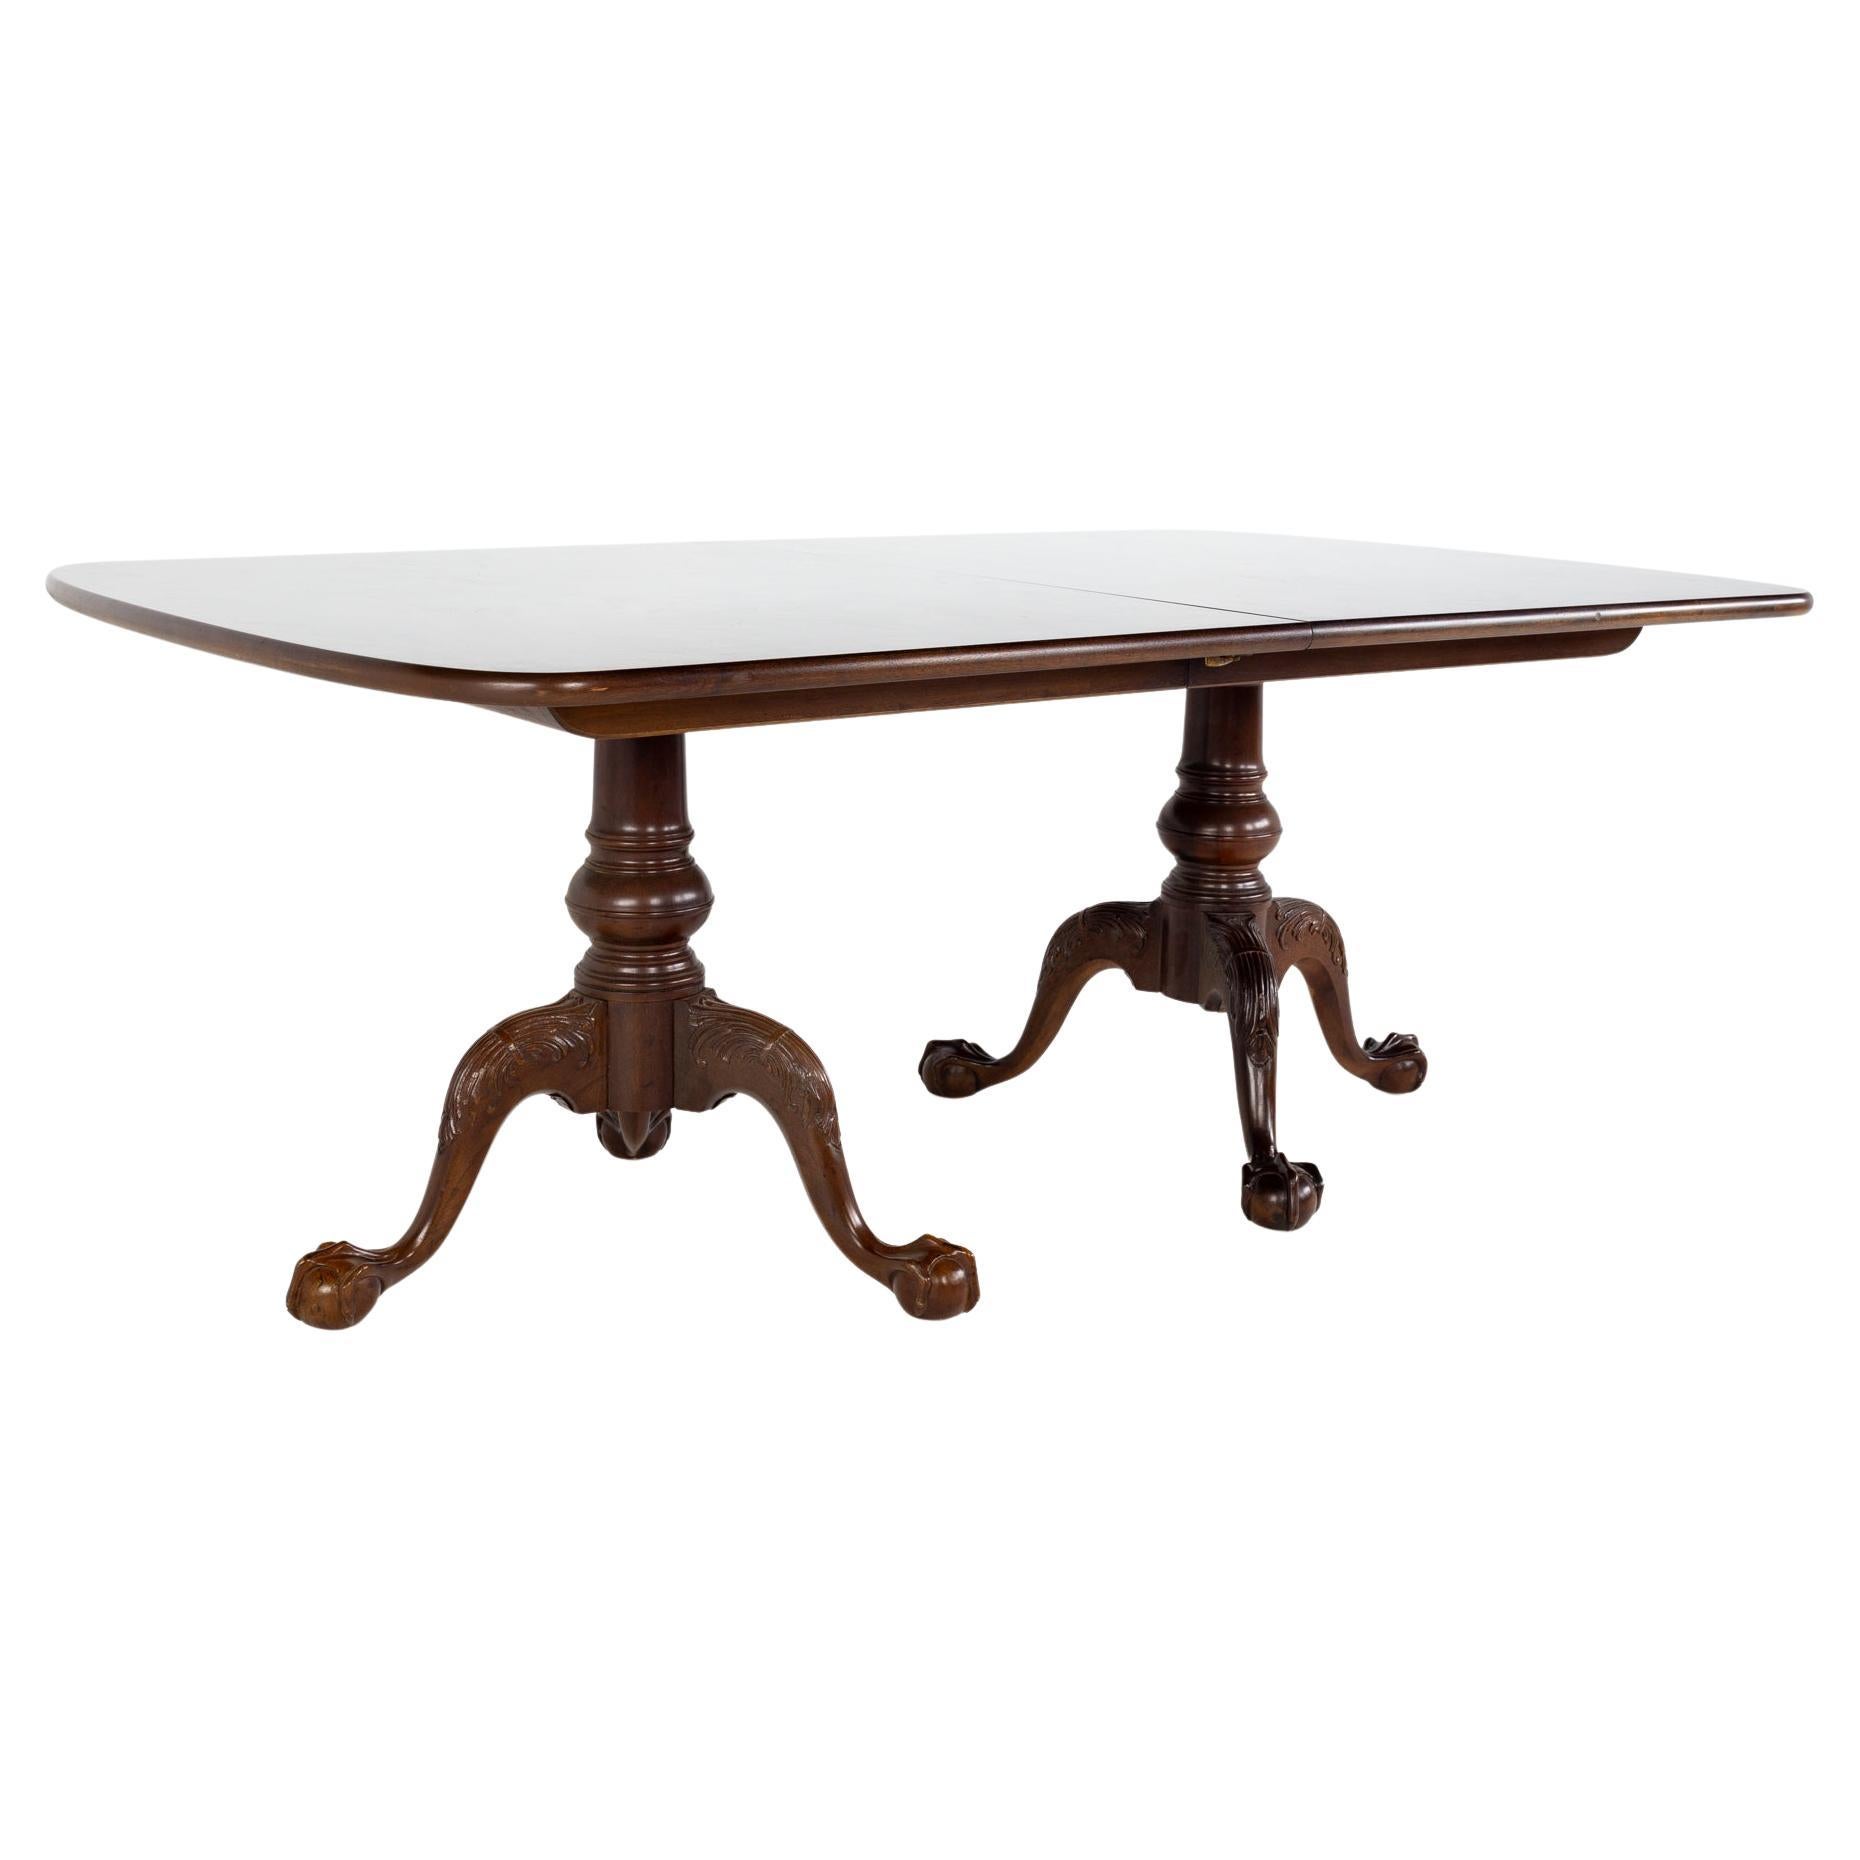 Henredon Aston Court Mahogany Dining Table with 2 Leaves